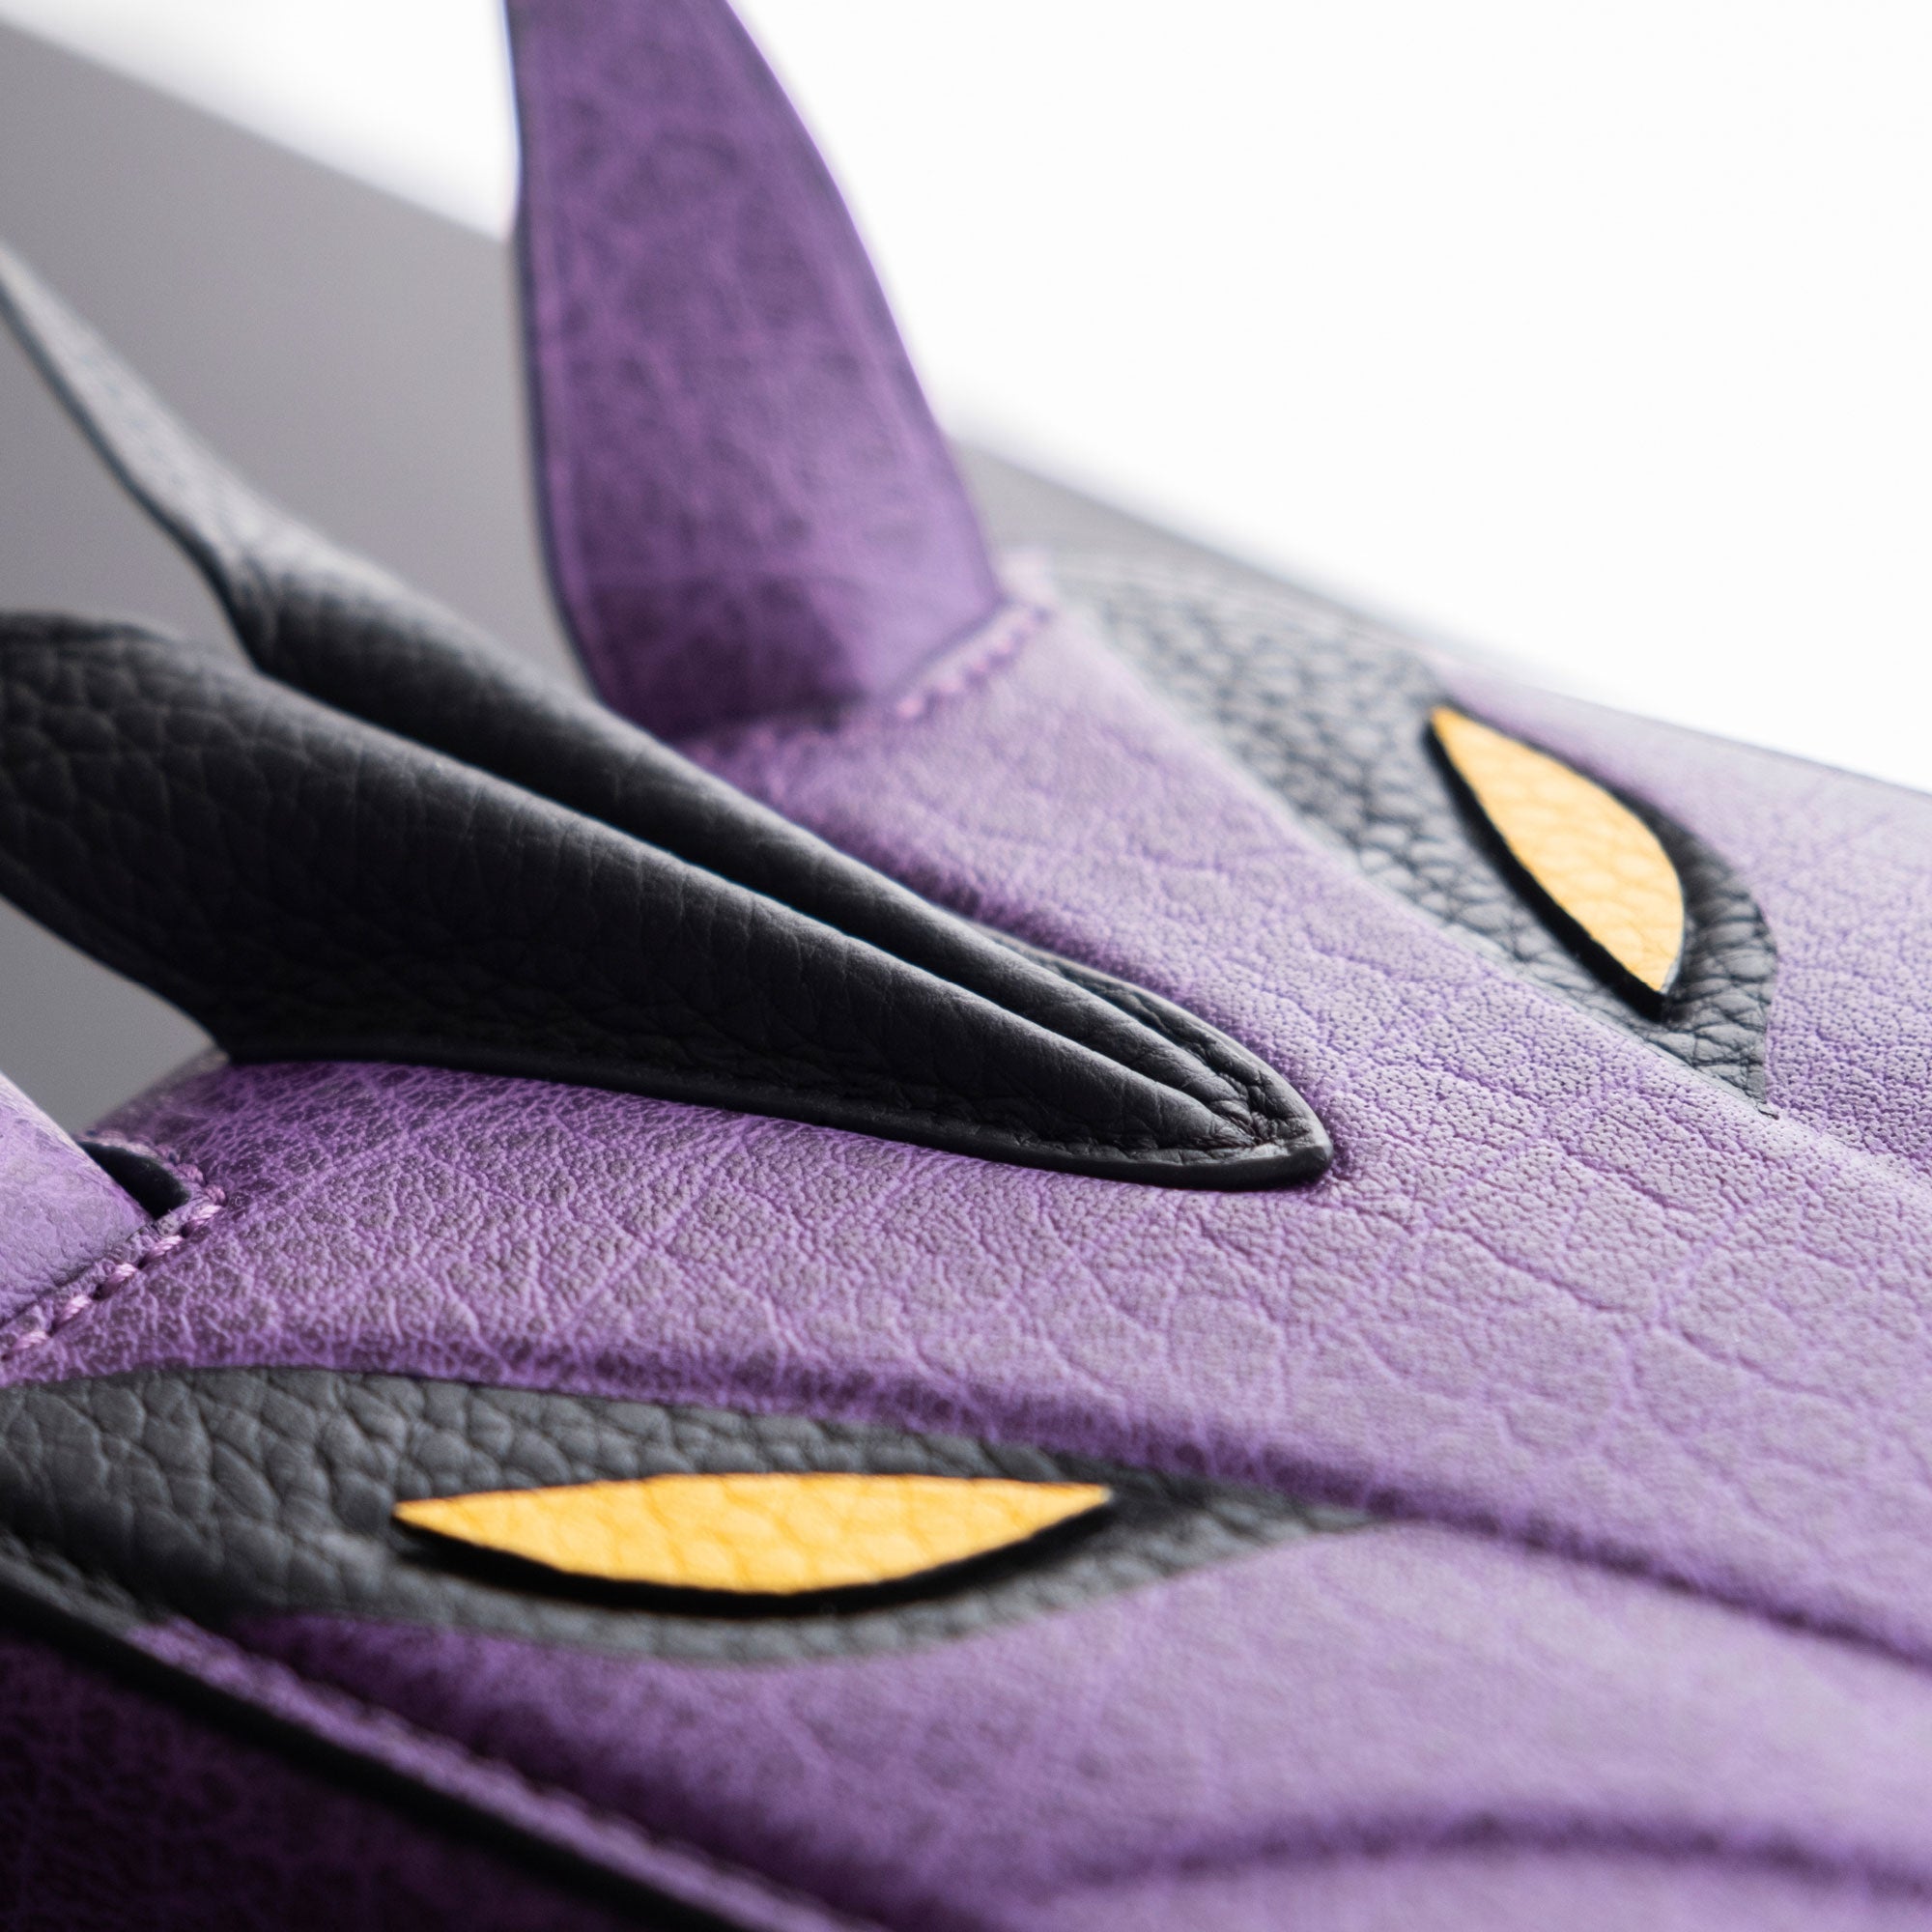 Detail photo of the leather work on the purple dragon Eaton 1 Watch case